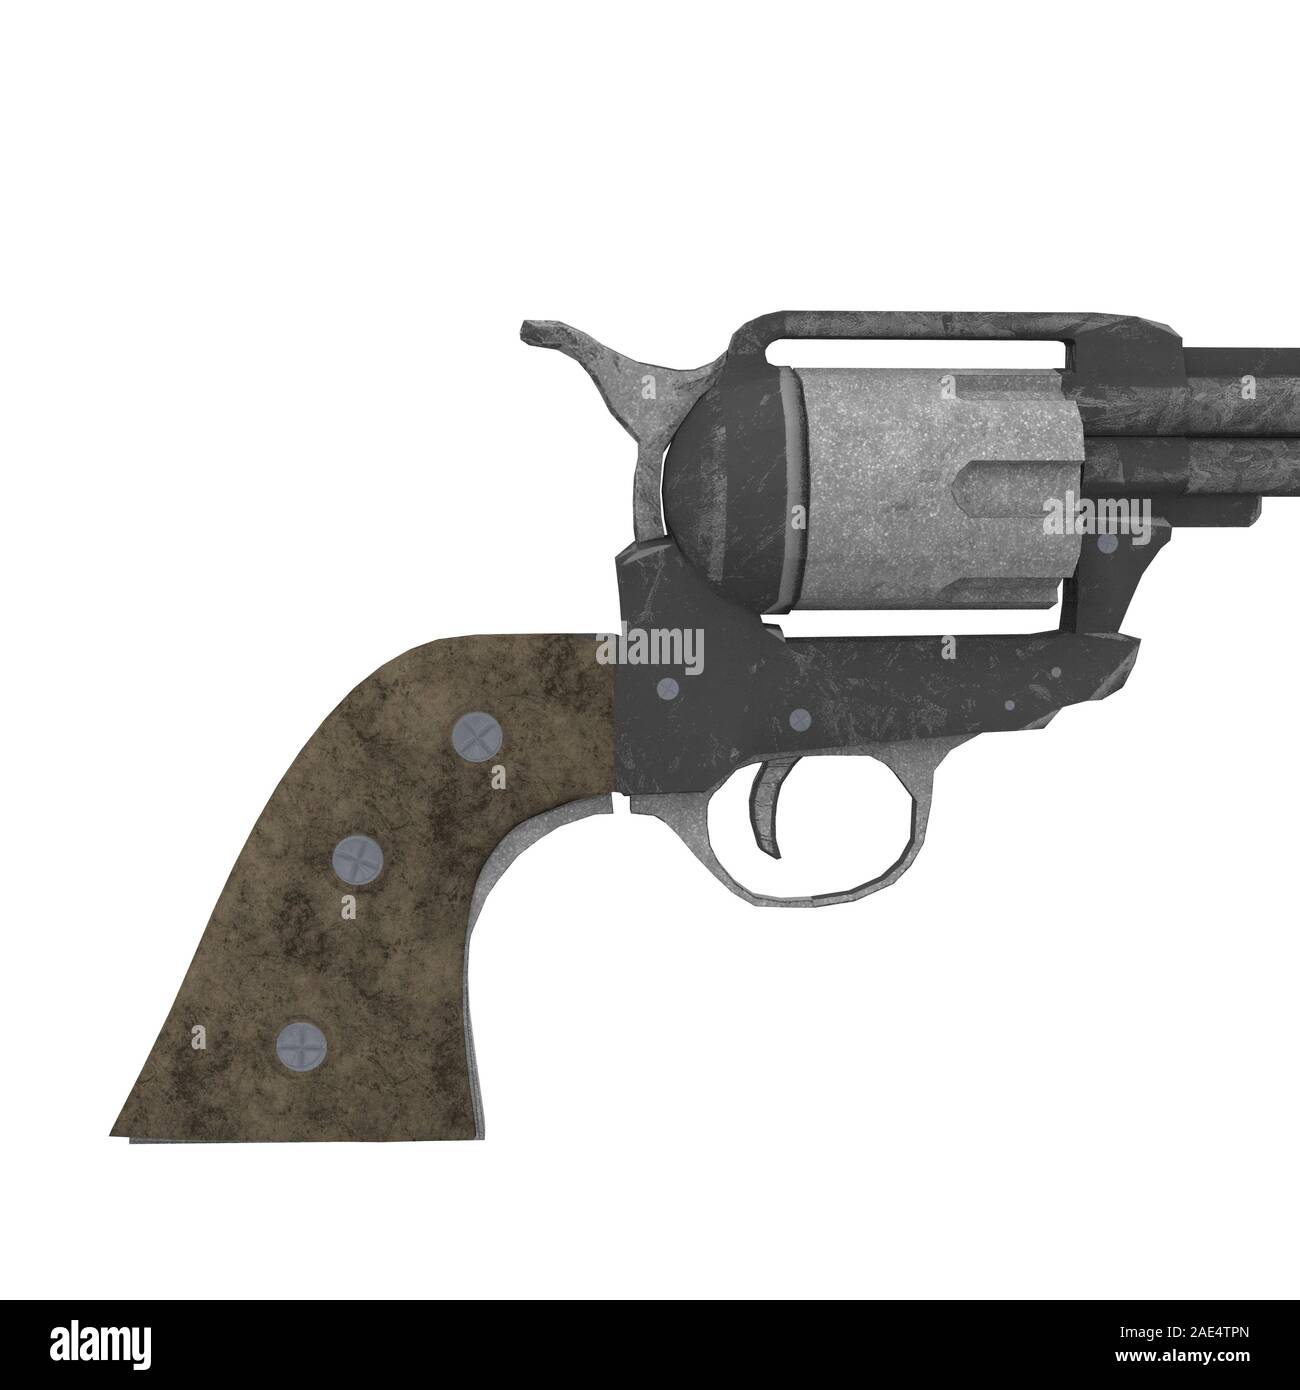 Colt Single Action Army handgun classical wild west armed revolver 3d illustration Stock Photo